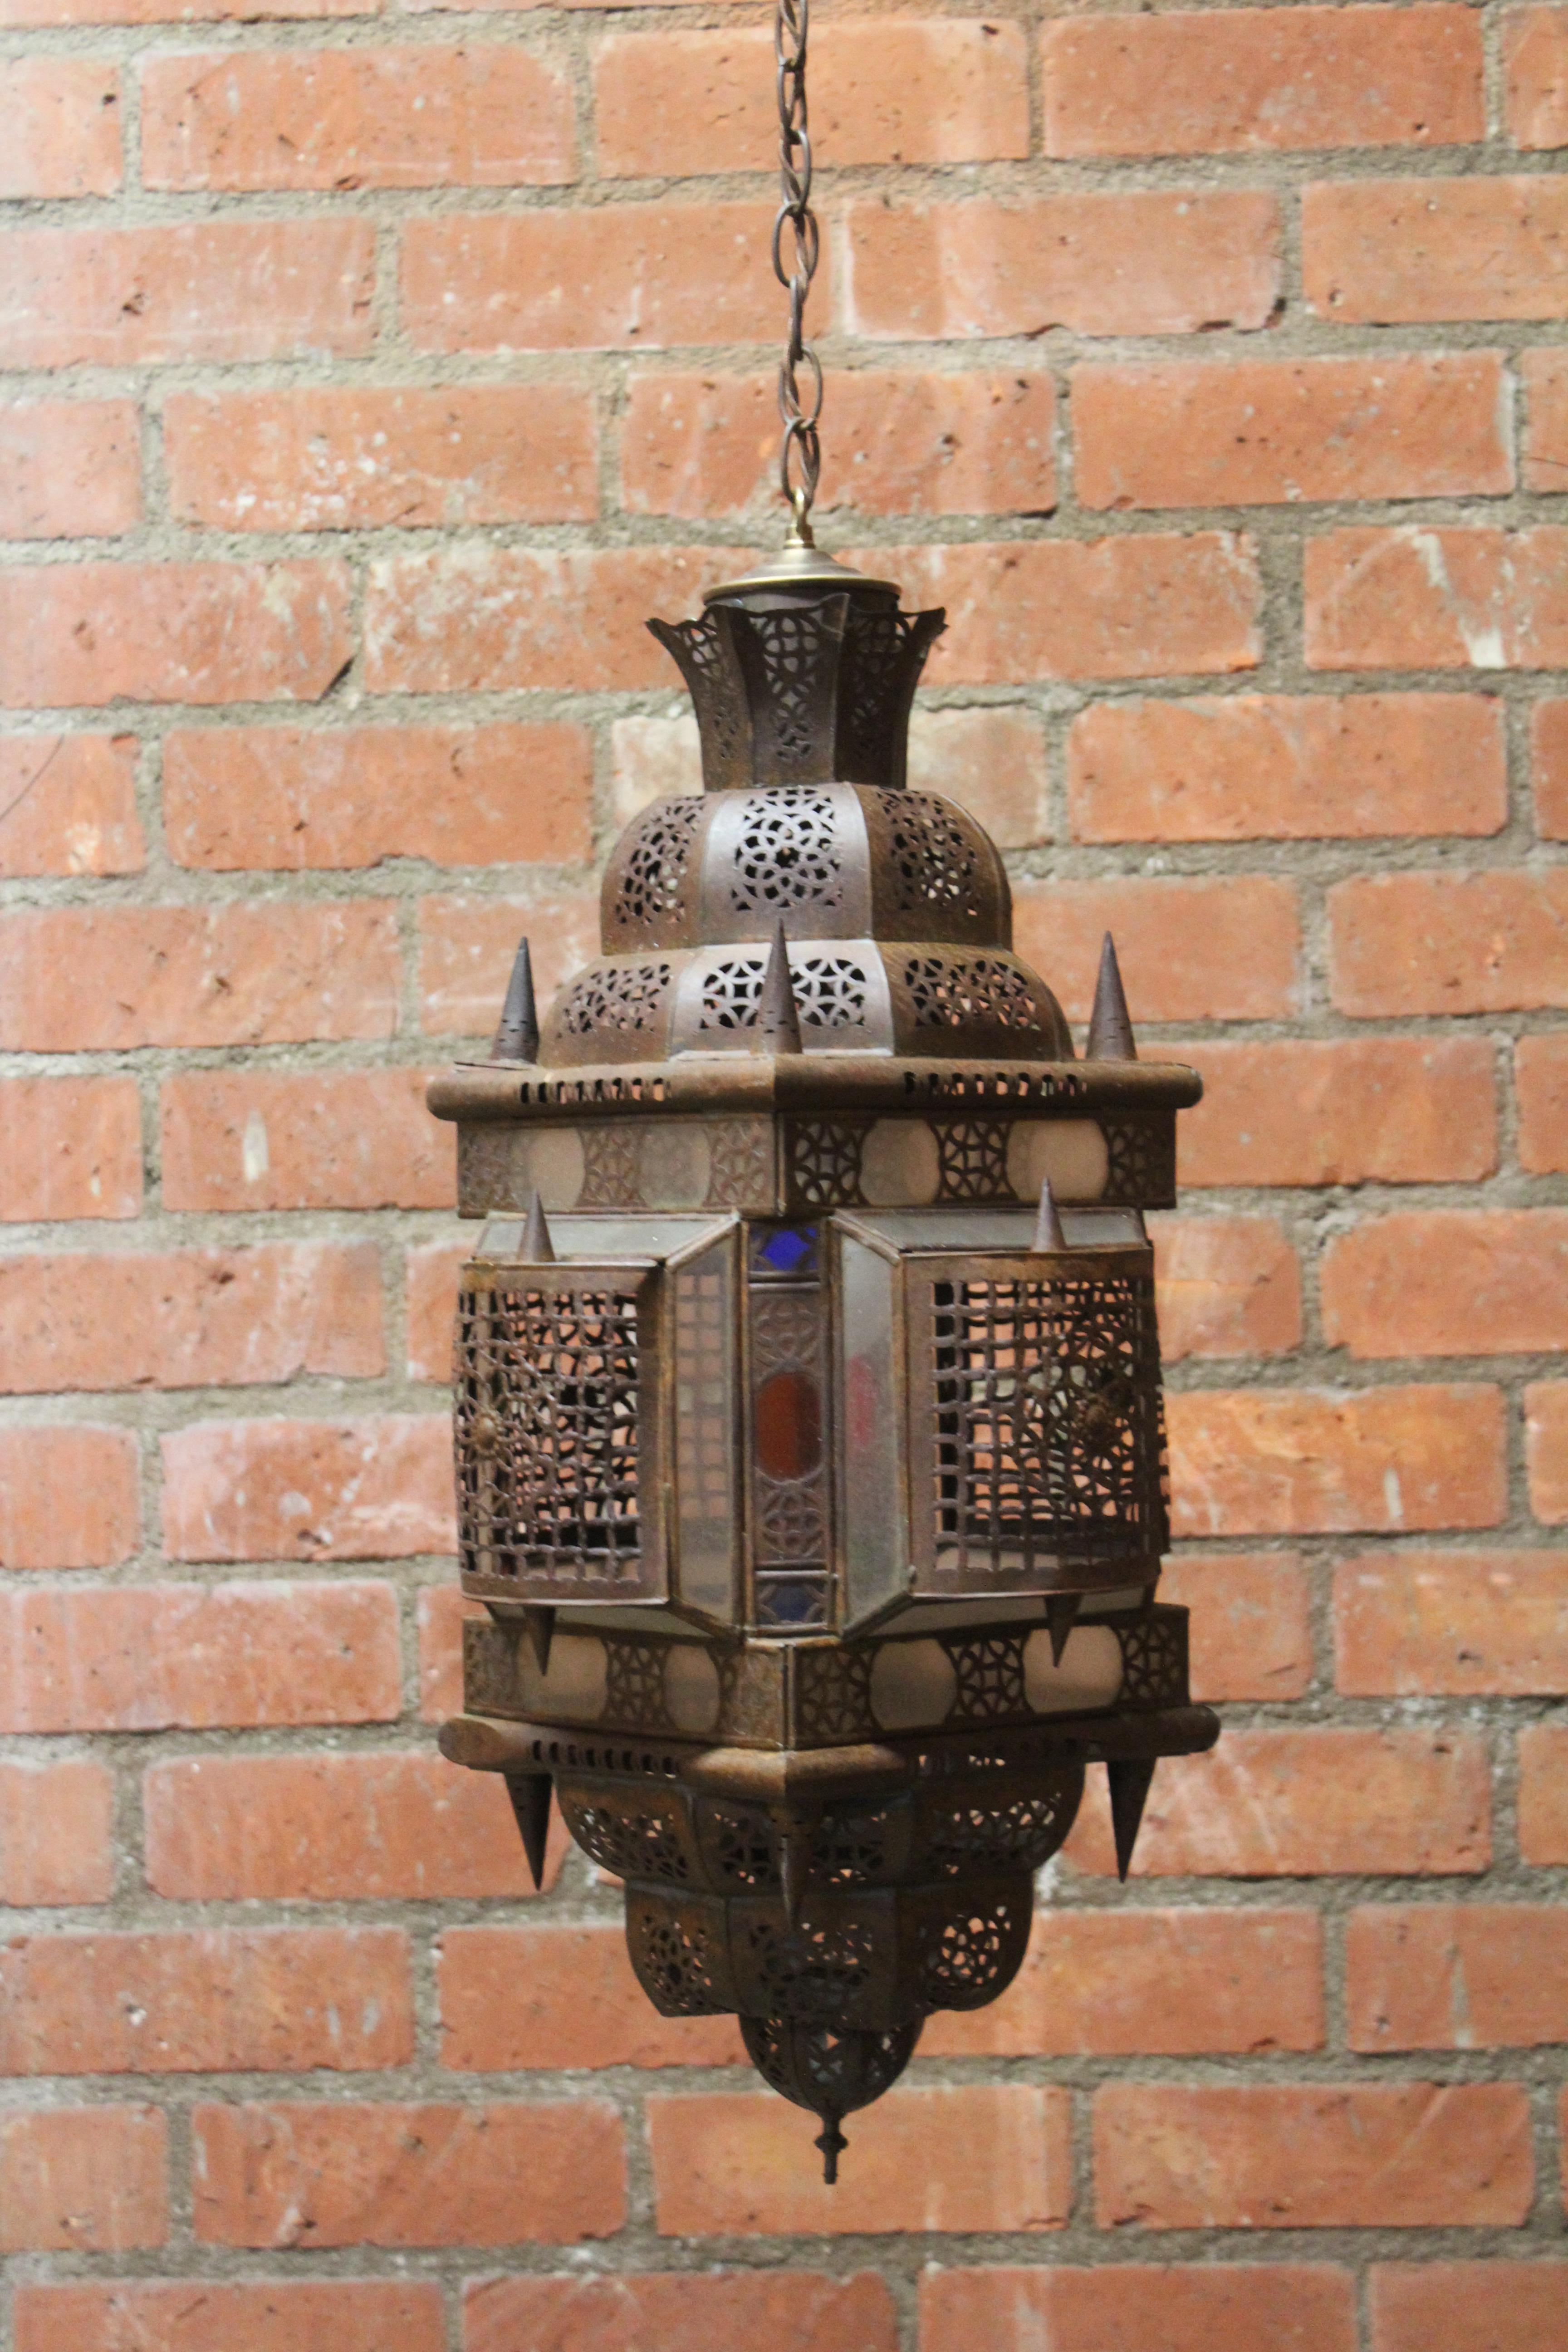 Vintage Moroccan pendant light. Newly rewired, and in excellent condition with age appropriate patina. Wired with an antique chain. Uses one single standard bulb. Made of metal with cut-outs. Colored glass inserts. 78